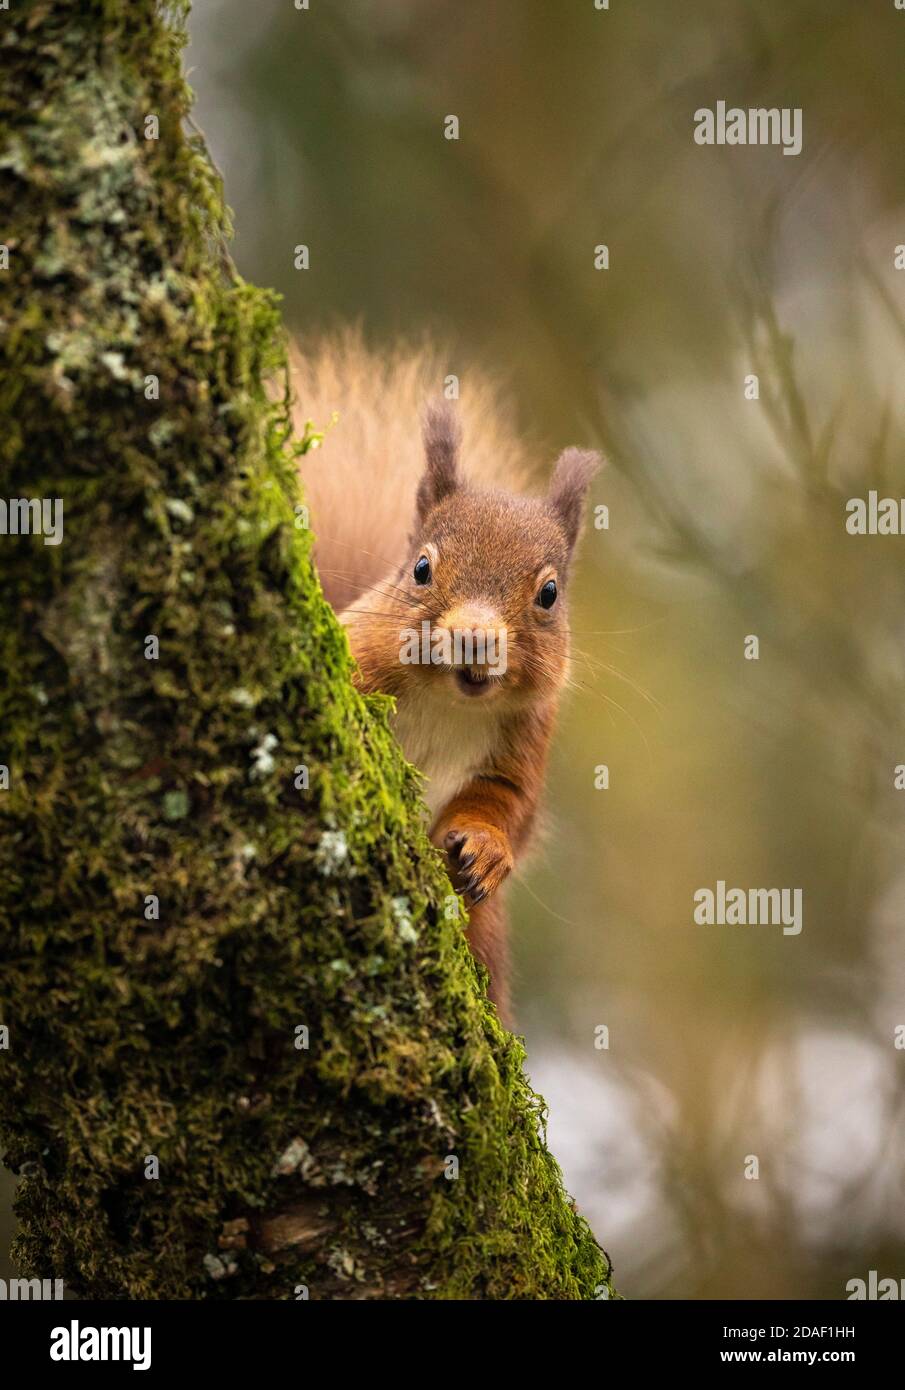 peeping red squirrel Stock Photo